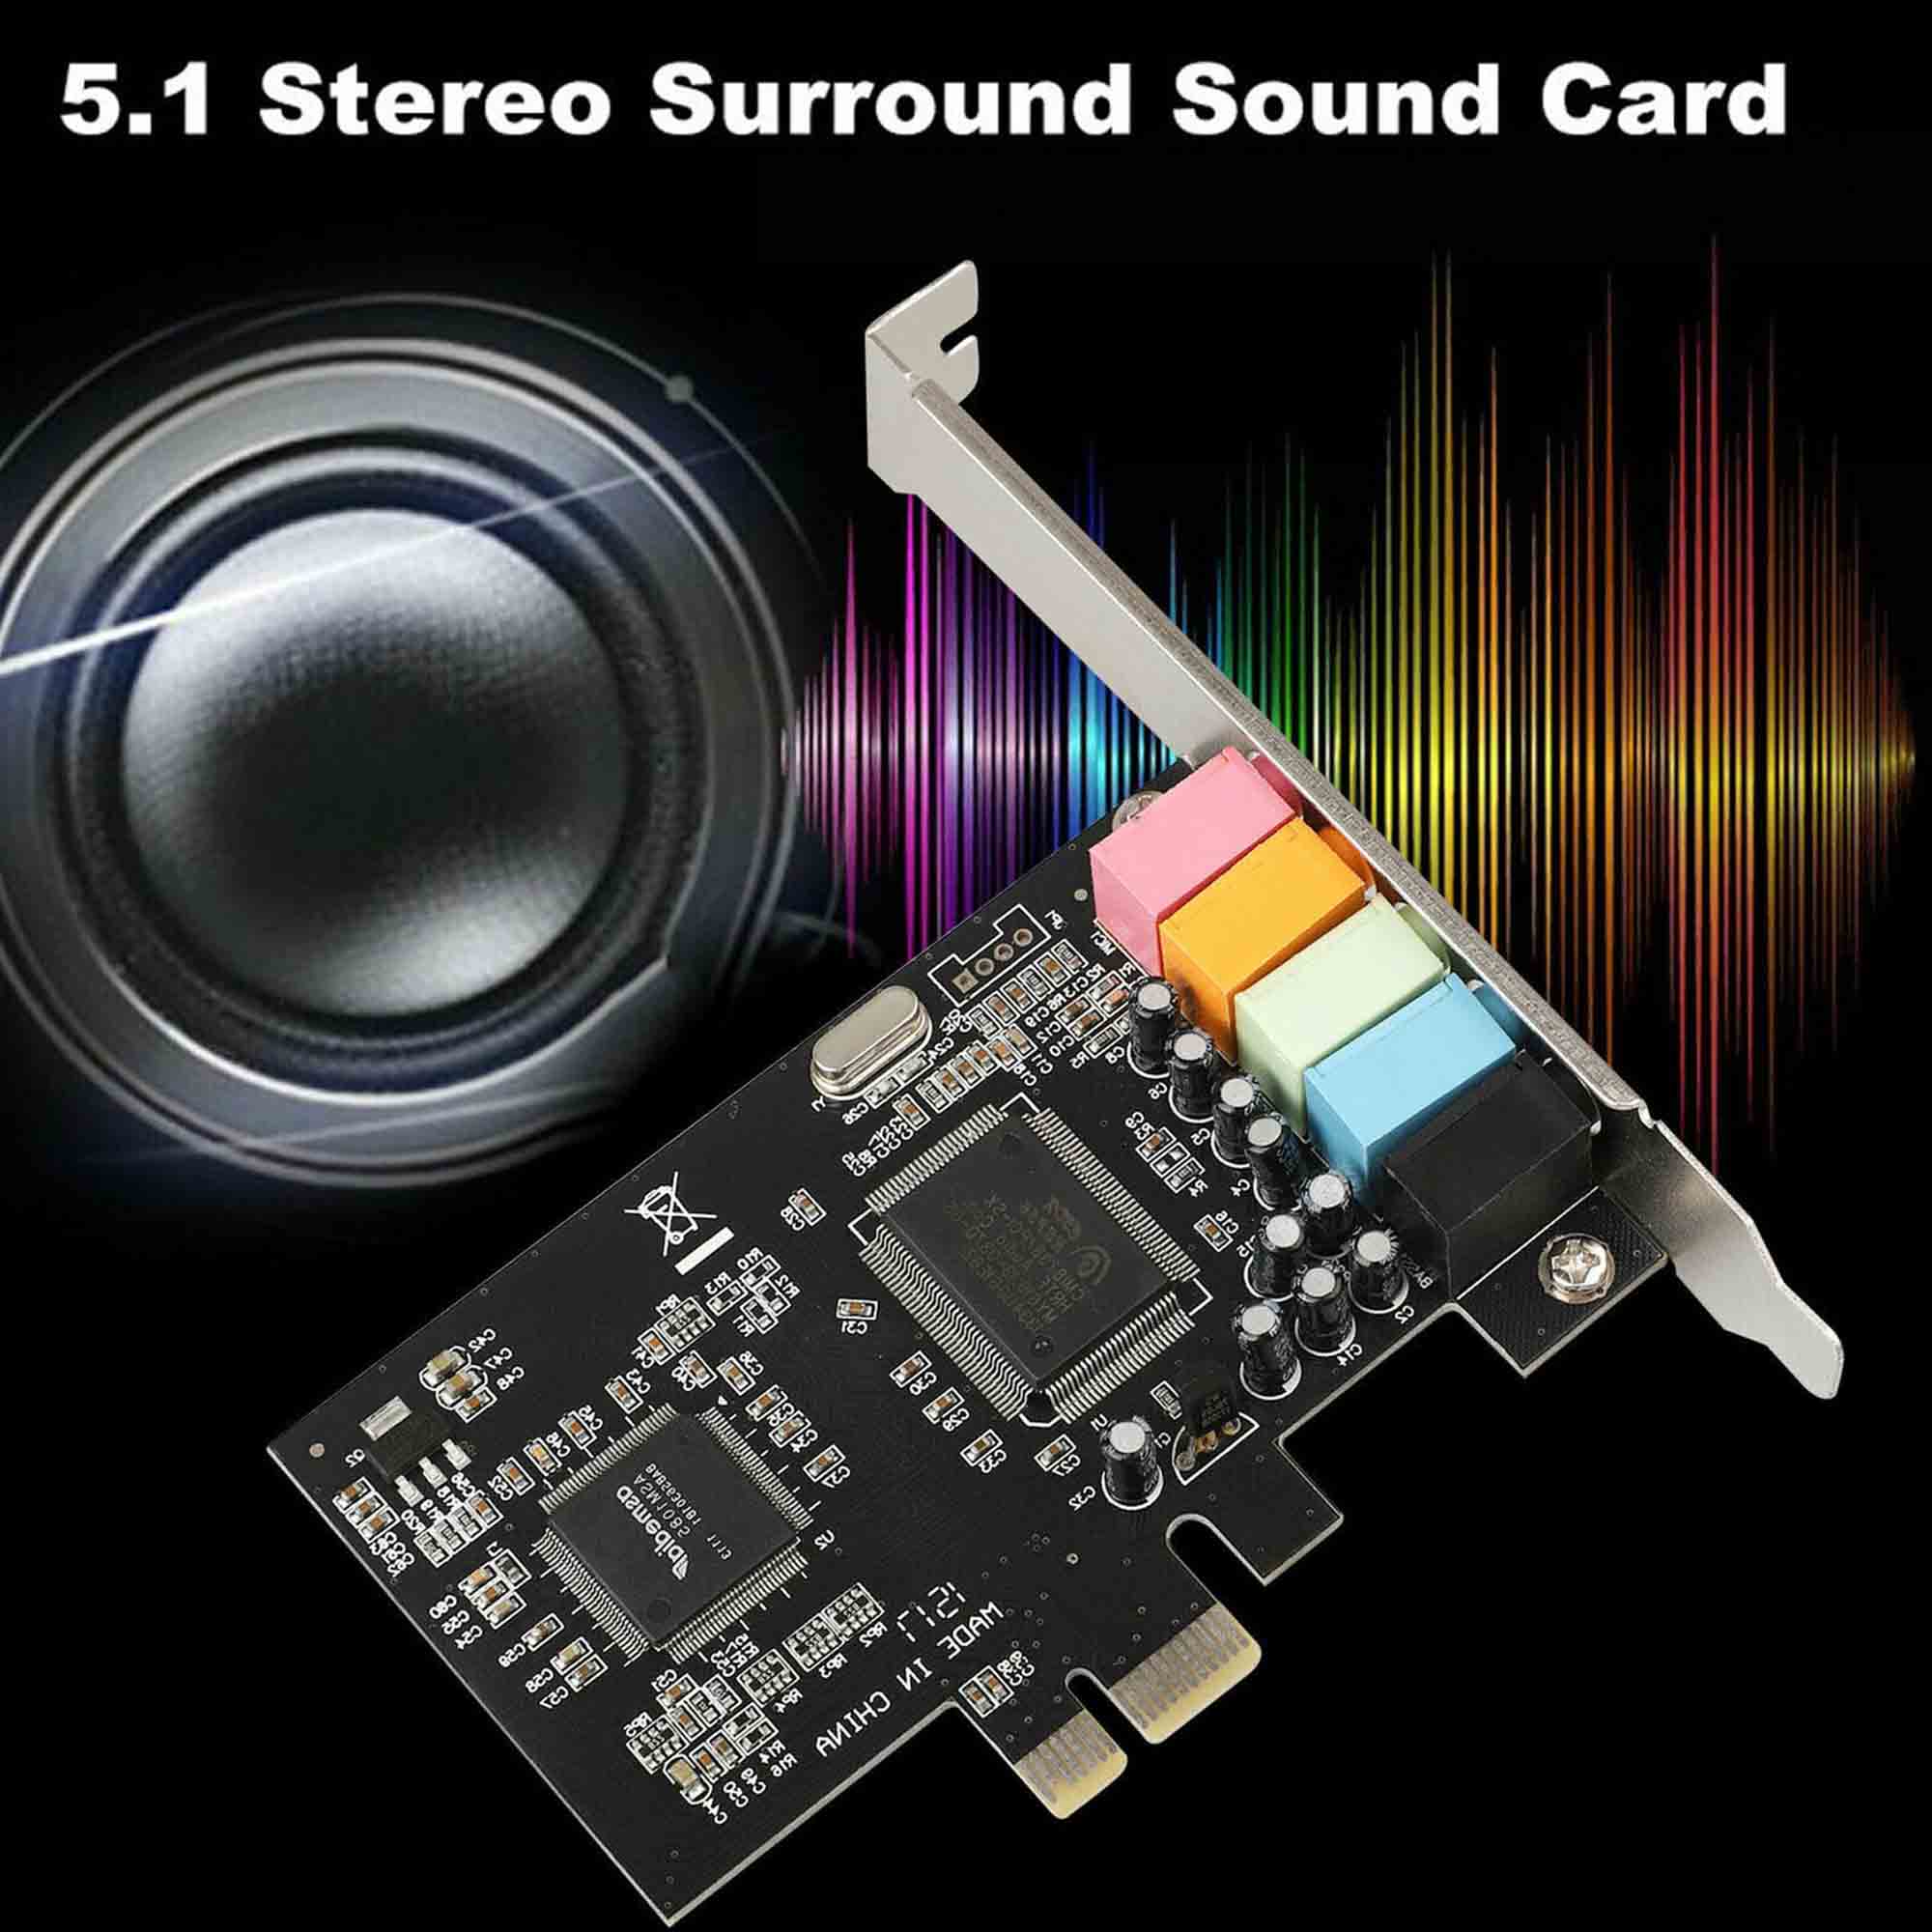 Drivers DVR Sound Cards & Media Devices